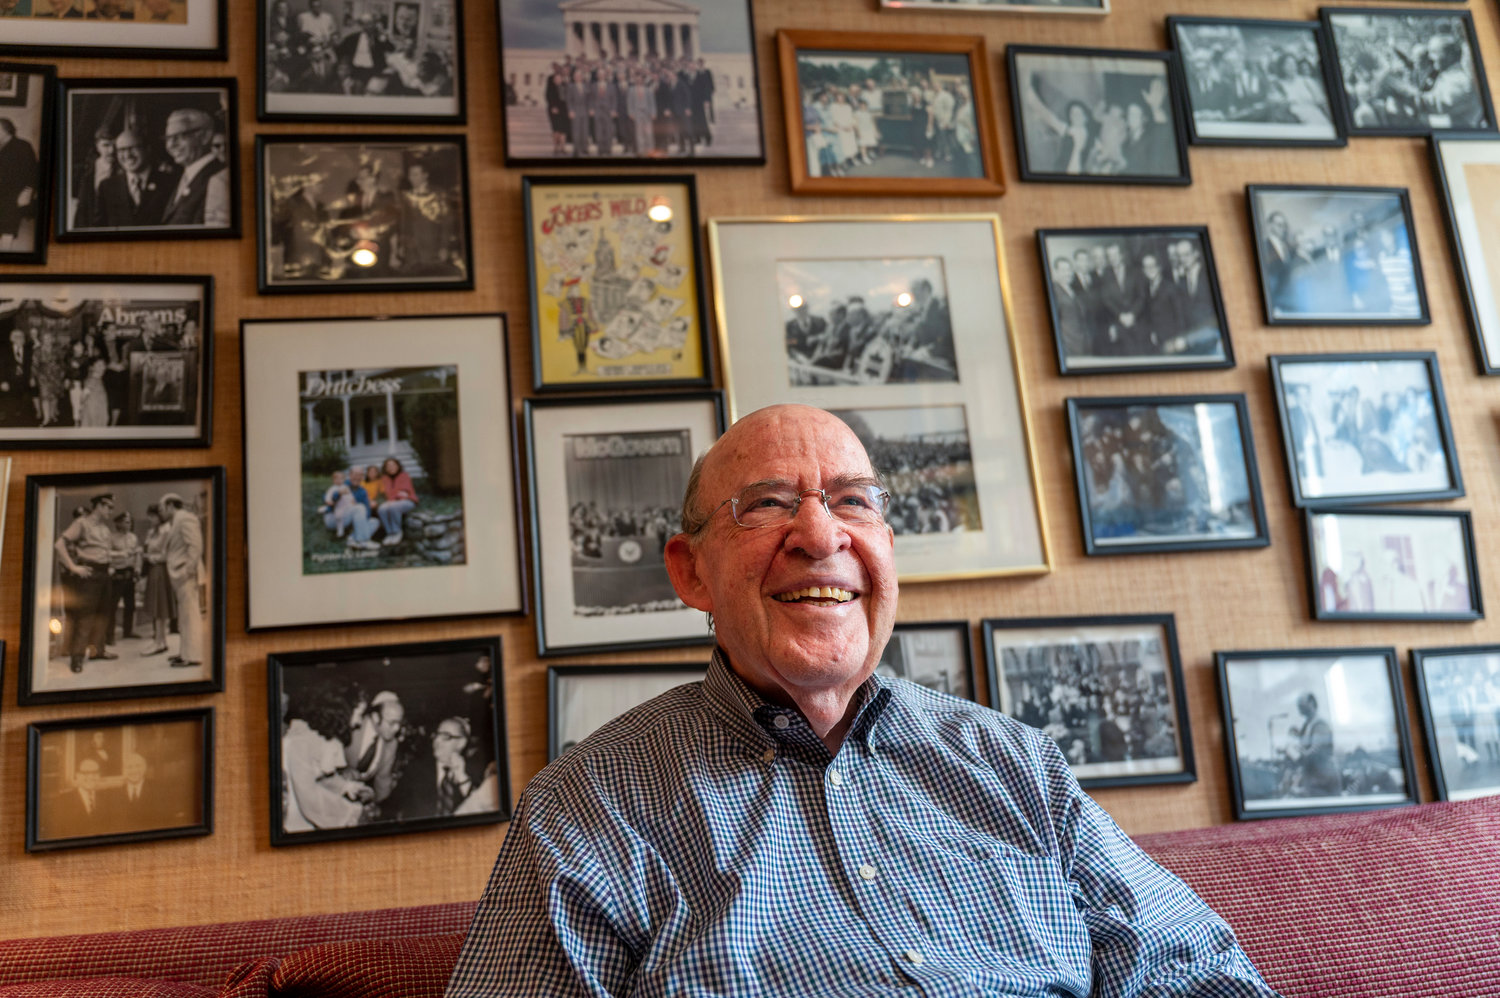 Former New York state attorney general Robert Abrams surrounds himself with many pictures of his life and career in his study. His memoir, ‘The Luckiest Guy in the World,’ shares Abrams’ long career in politics, focusing on his time as state attorney general. Abrams says he changed the nature of the office from simply defending the state government to instead advocating for people’s rights.